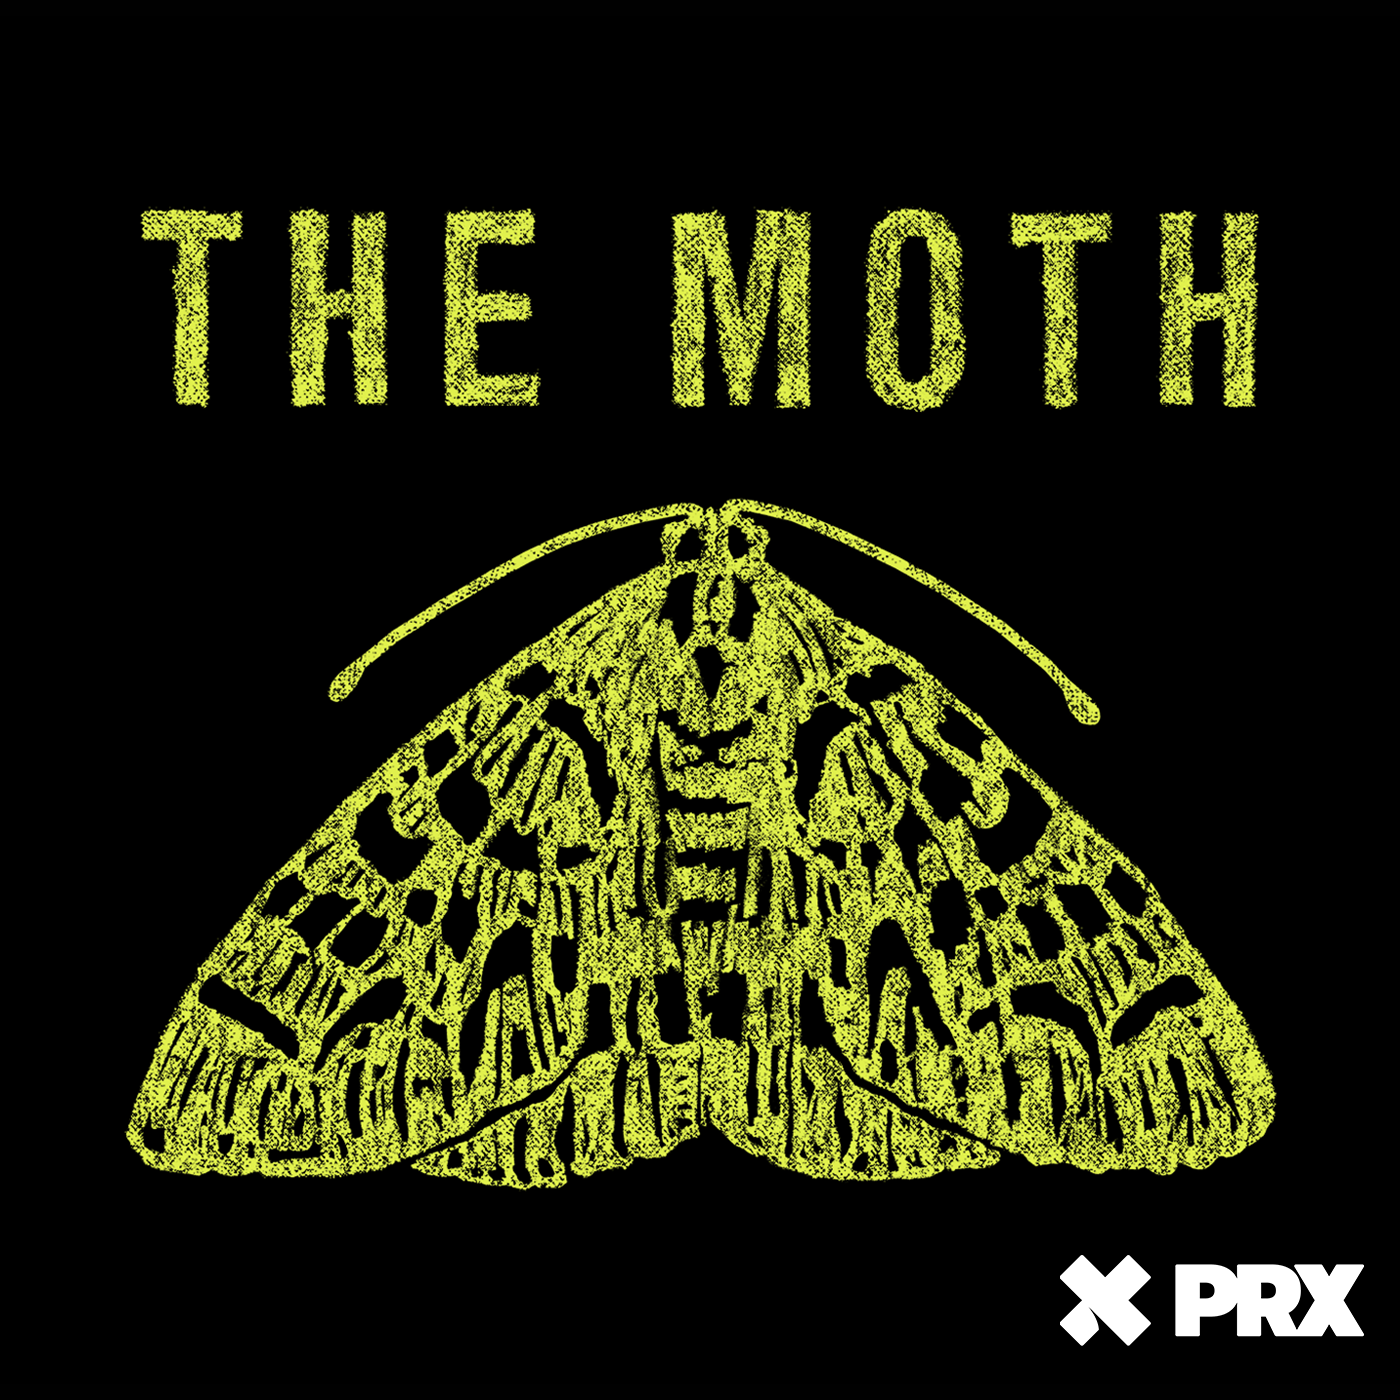 The Moth Radio Hour: Reconciling the Past